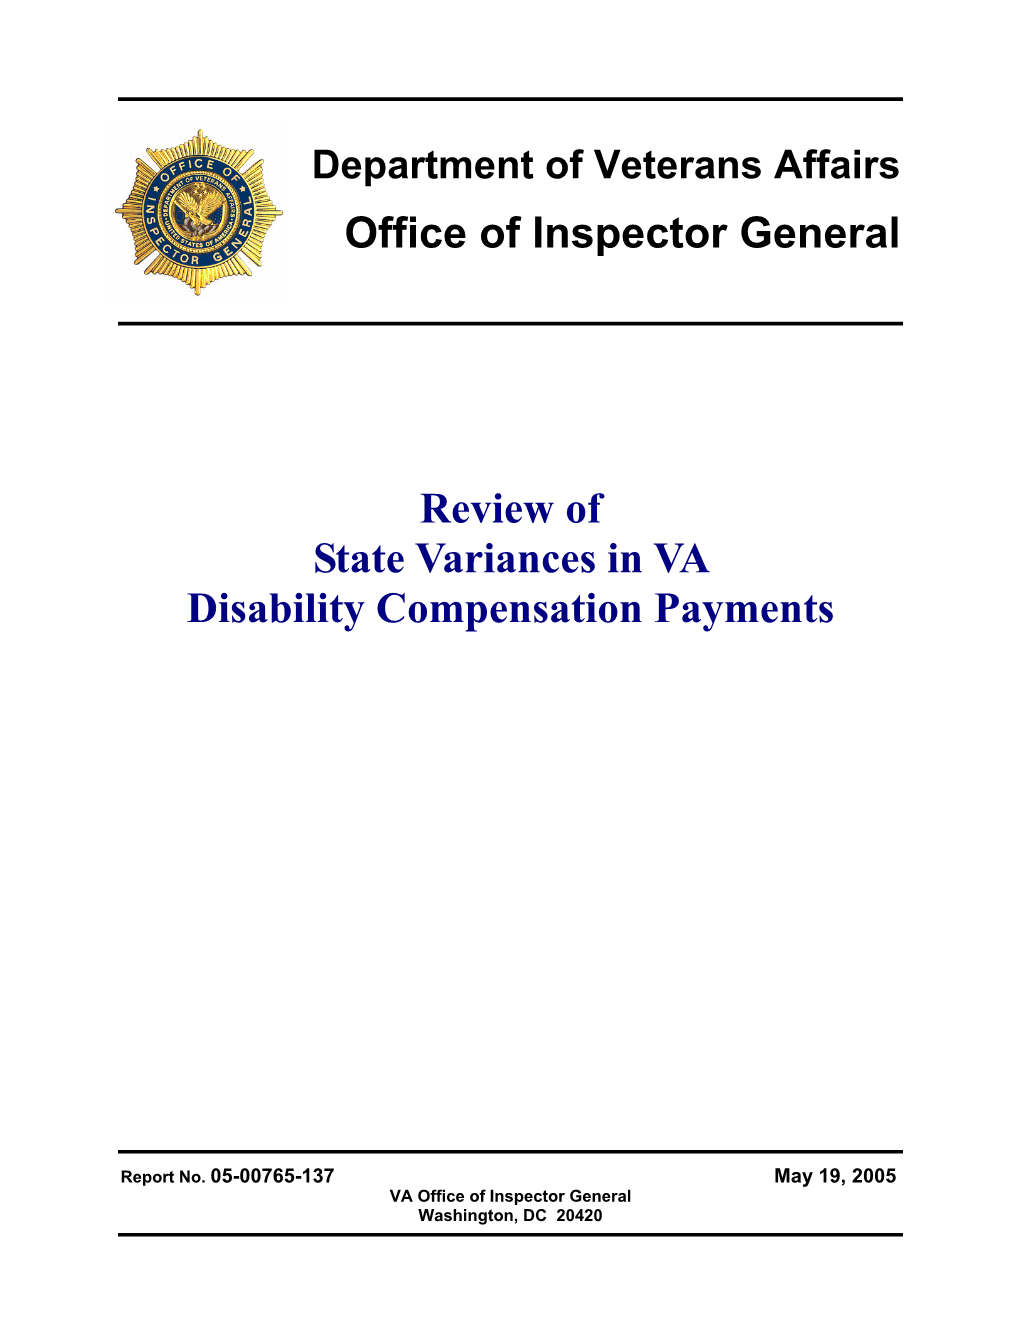 Department of Veterans Affairs Office of Inspector General Review of State Variances in VA Disability Compensation Payments;